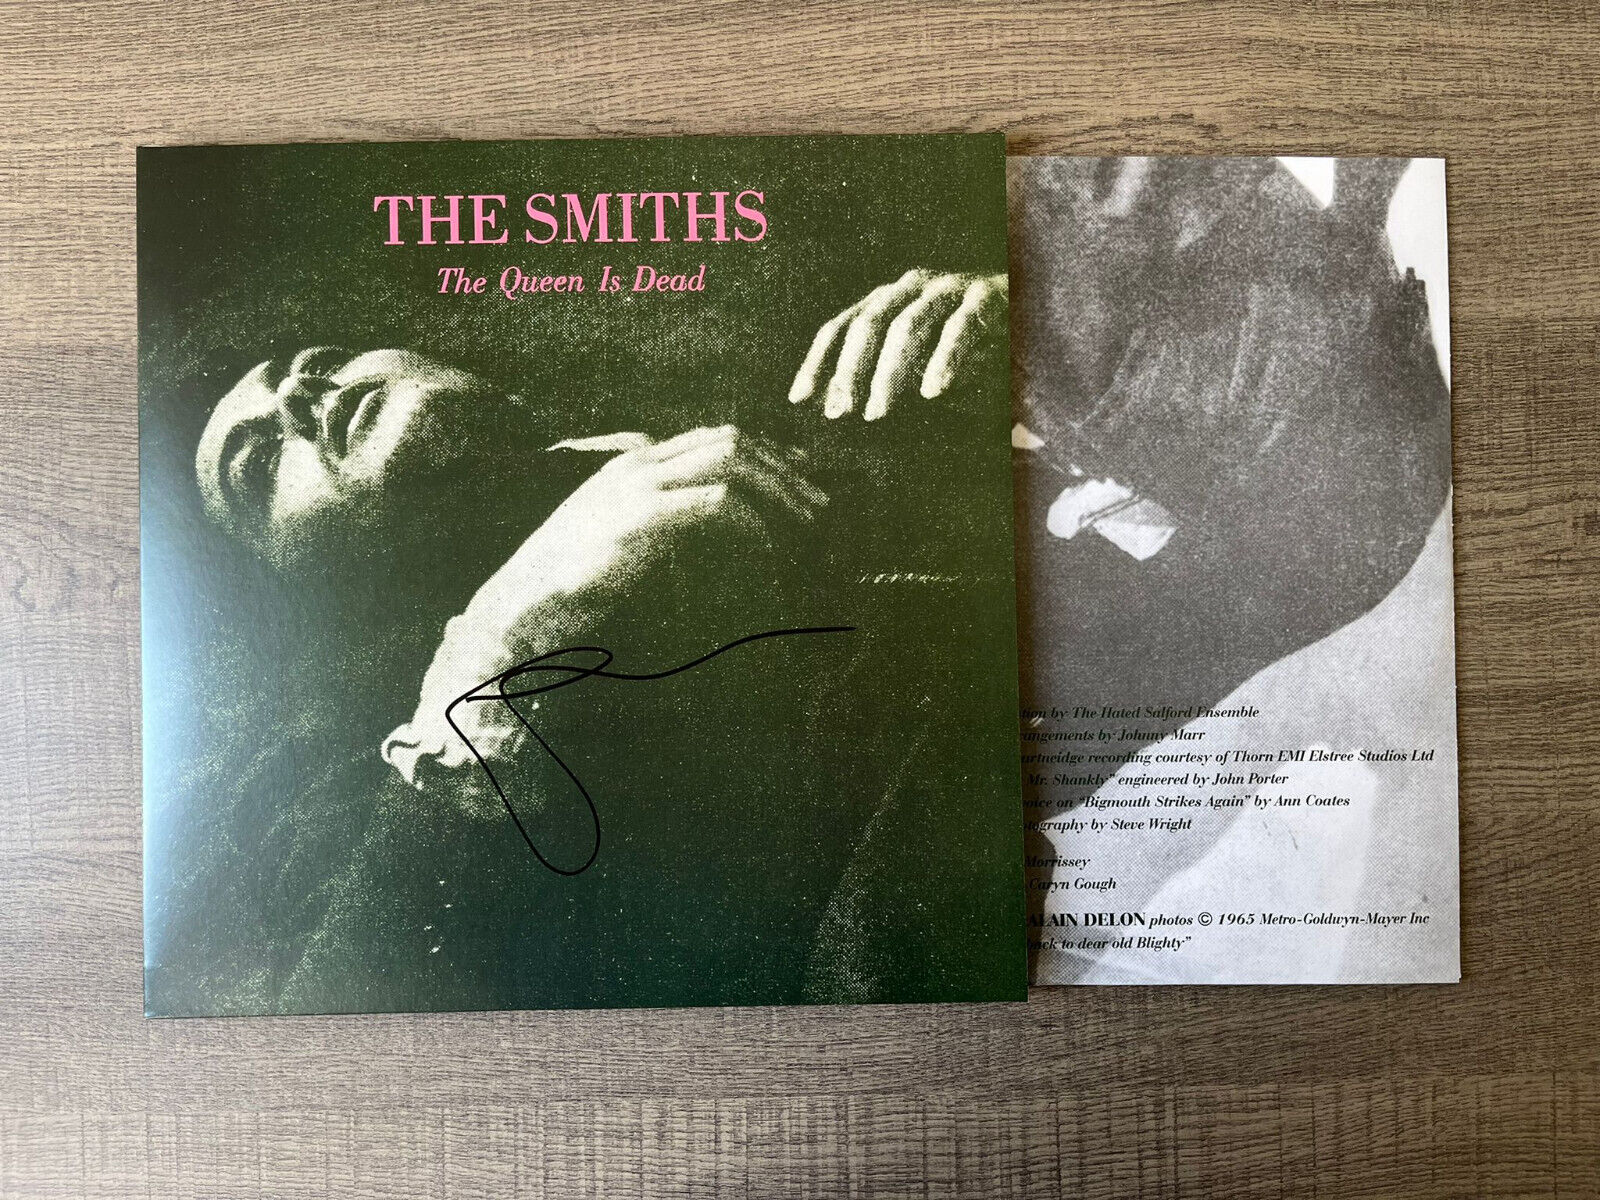 JOHNNY MARR Signed The Smiths The Queen Is Dead Vinyl RARE - PROOF/COA